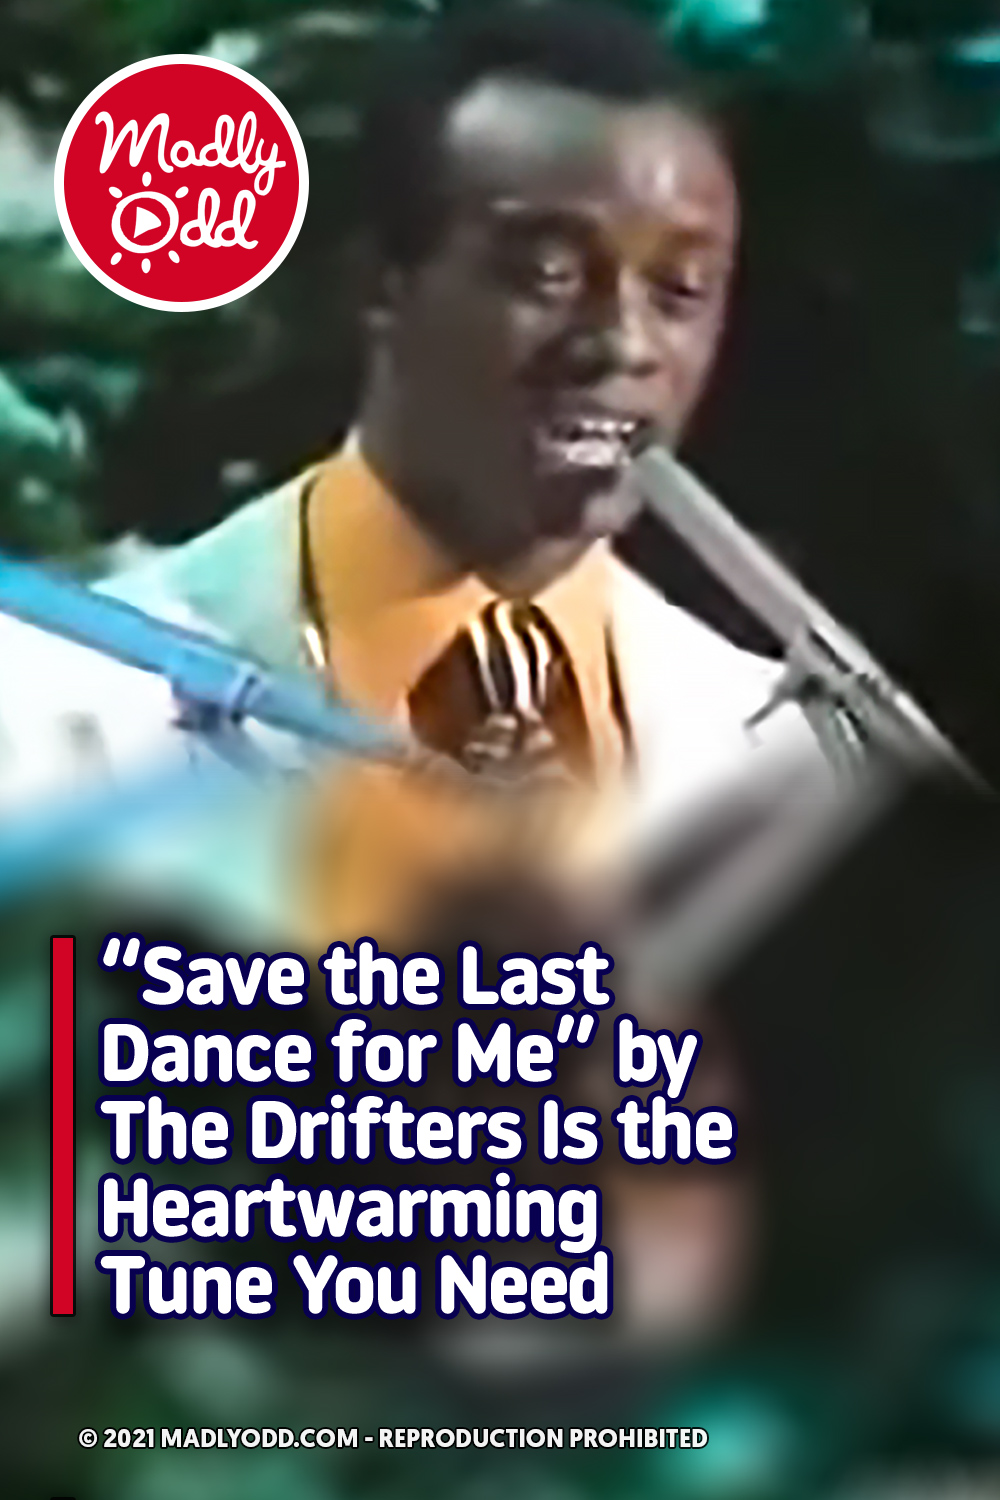 “Save the Last Dance for Me” by The Drifters Is the Heartwarming Tune You Need